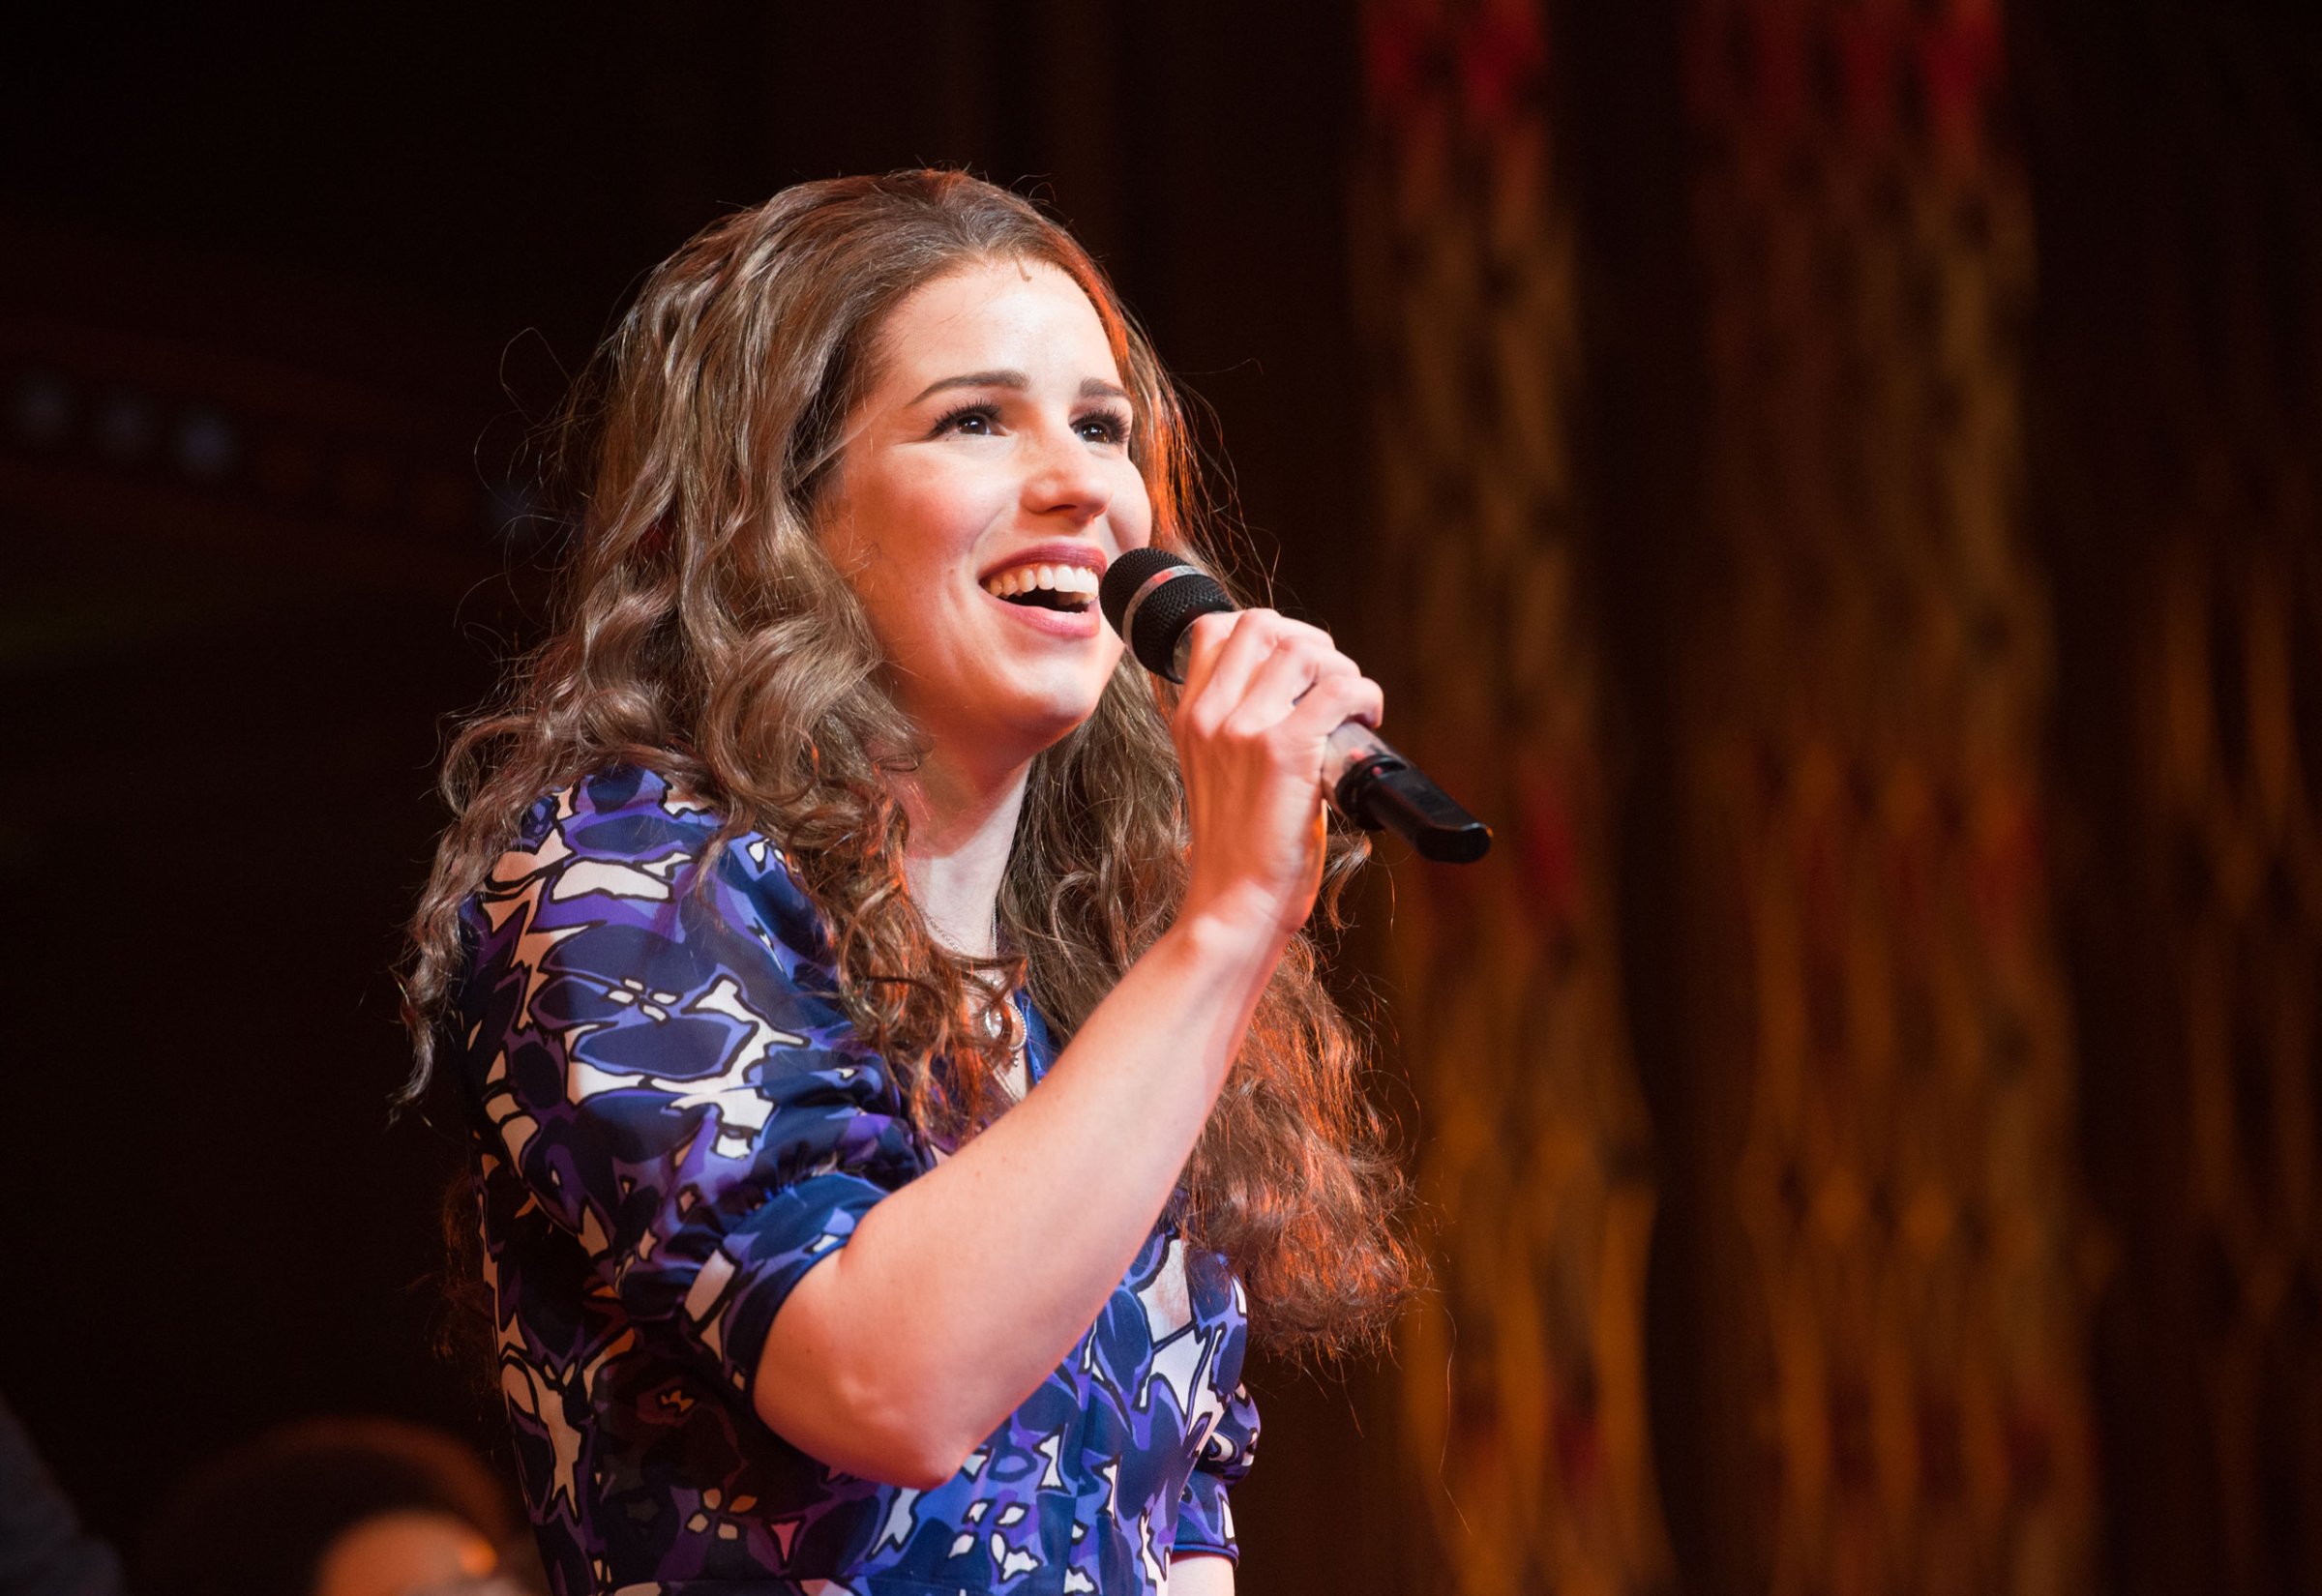 Chilina Kennedy Debut Performance "Beautiful - The Carole King Musical"